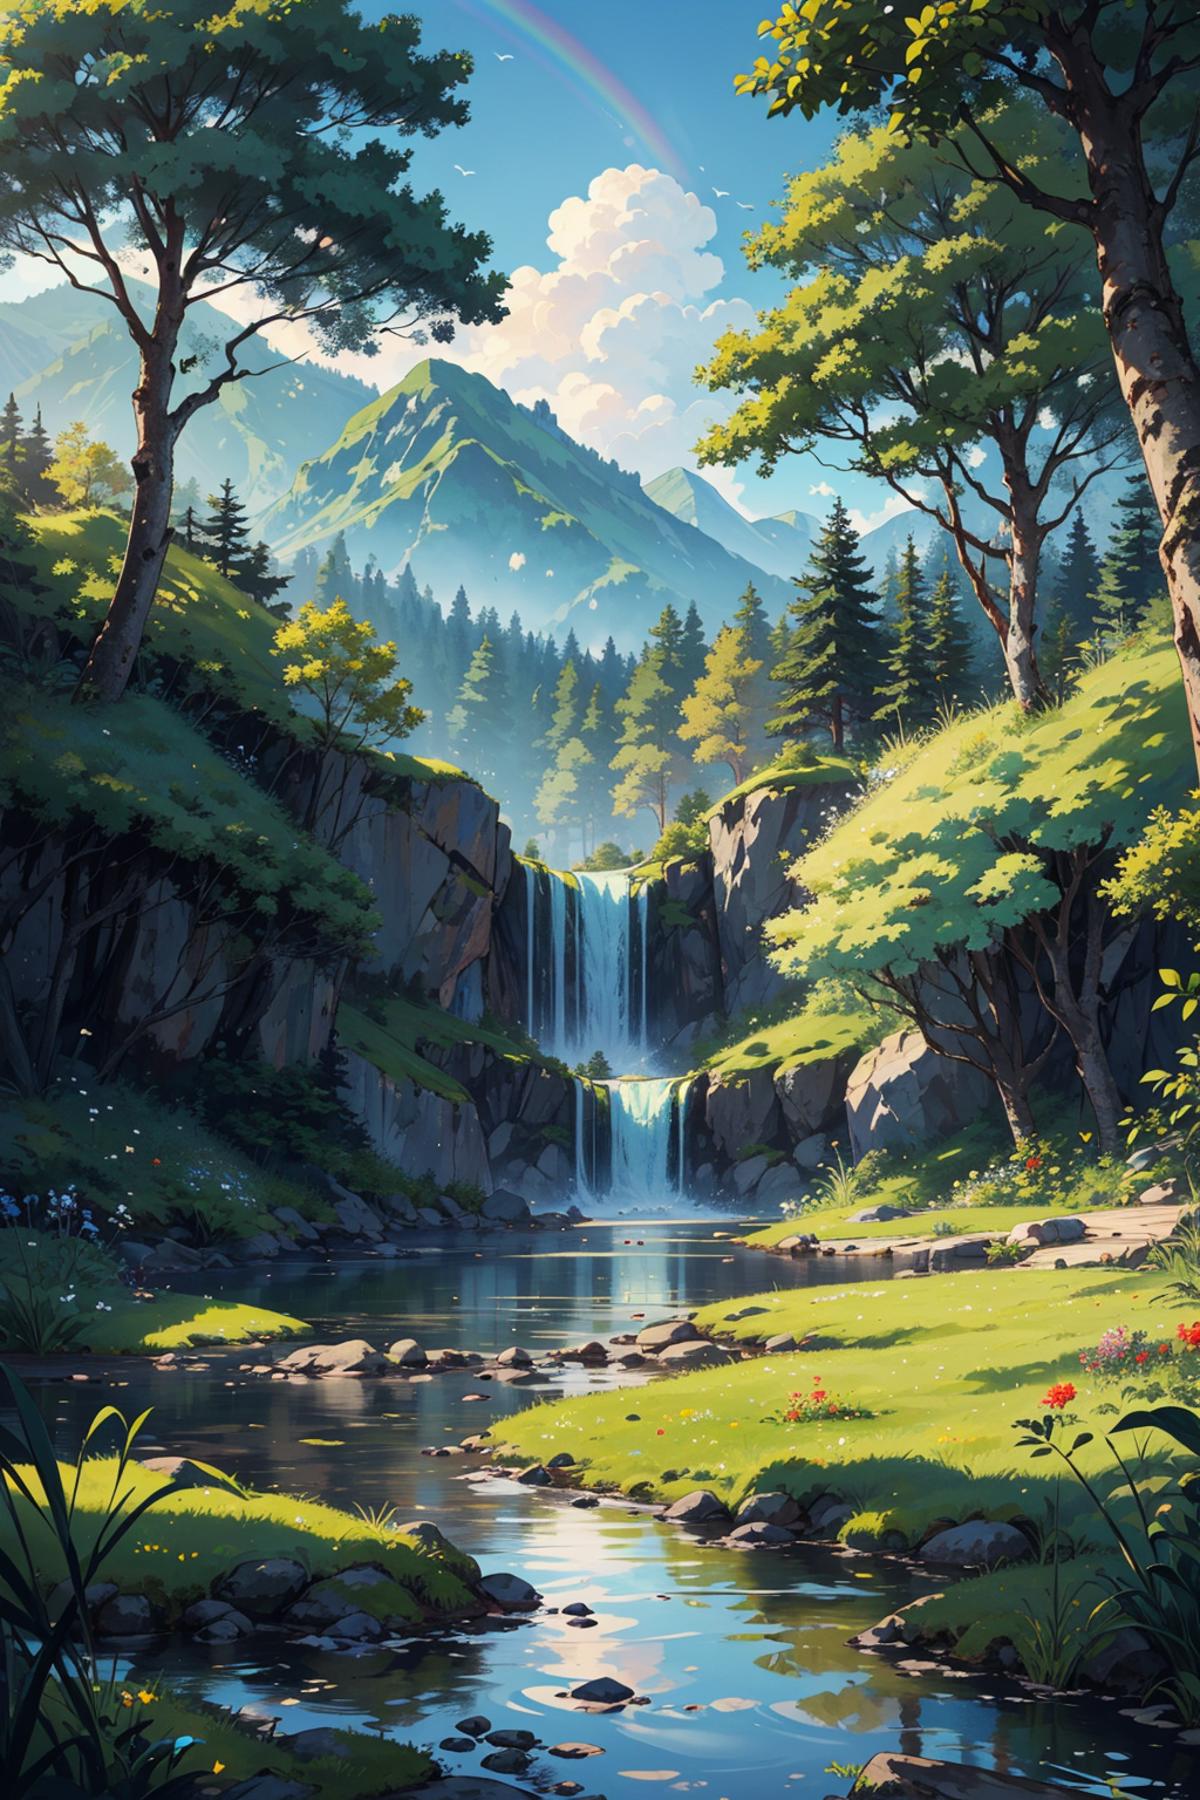 A beautiful waterfall in a mountain valley, surrounded by lush greenery and rocks.